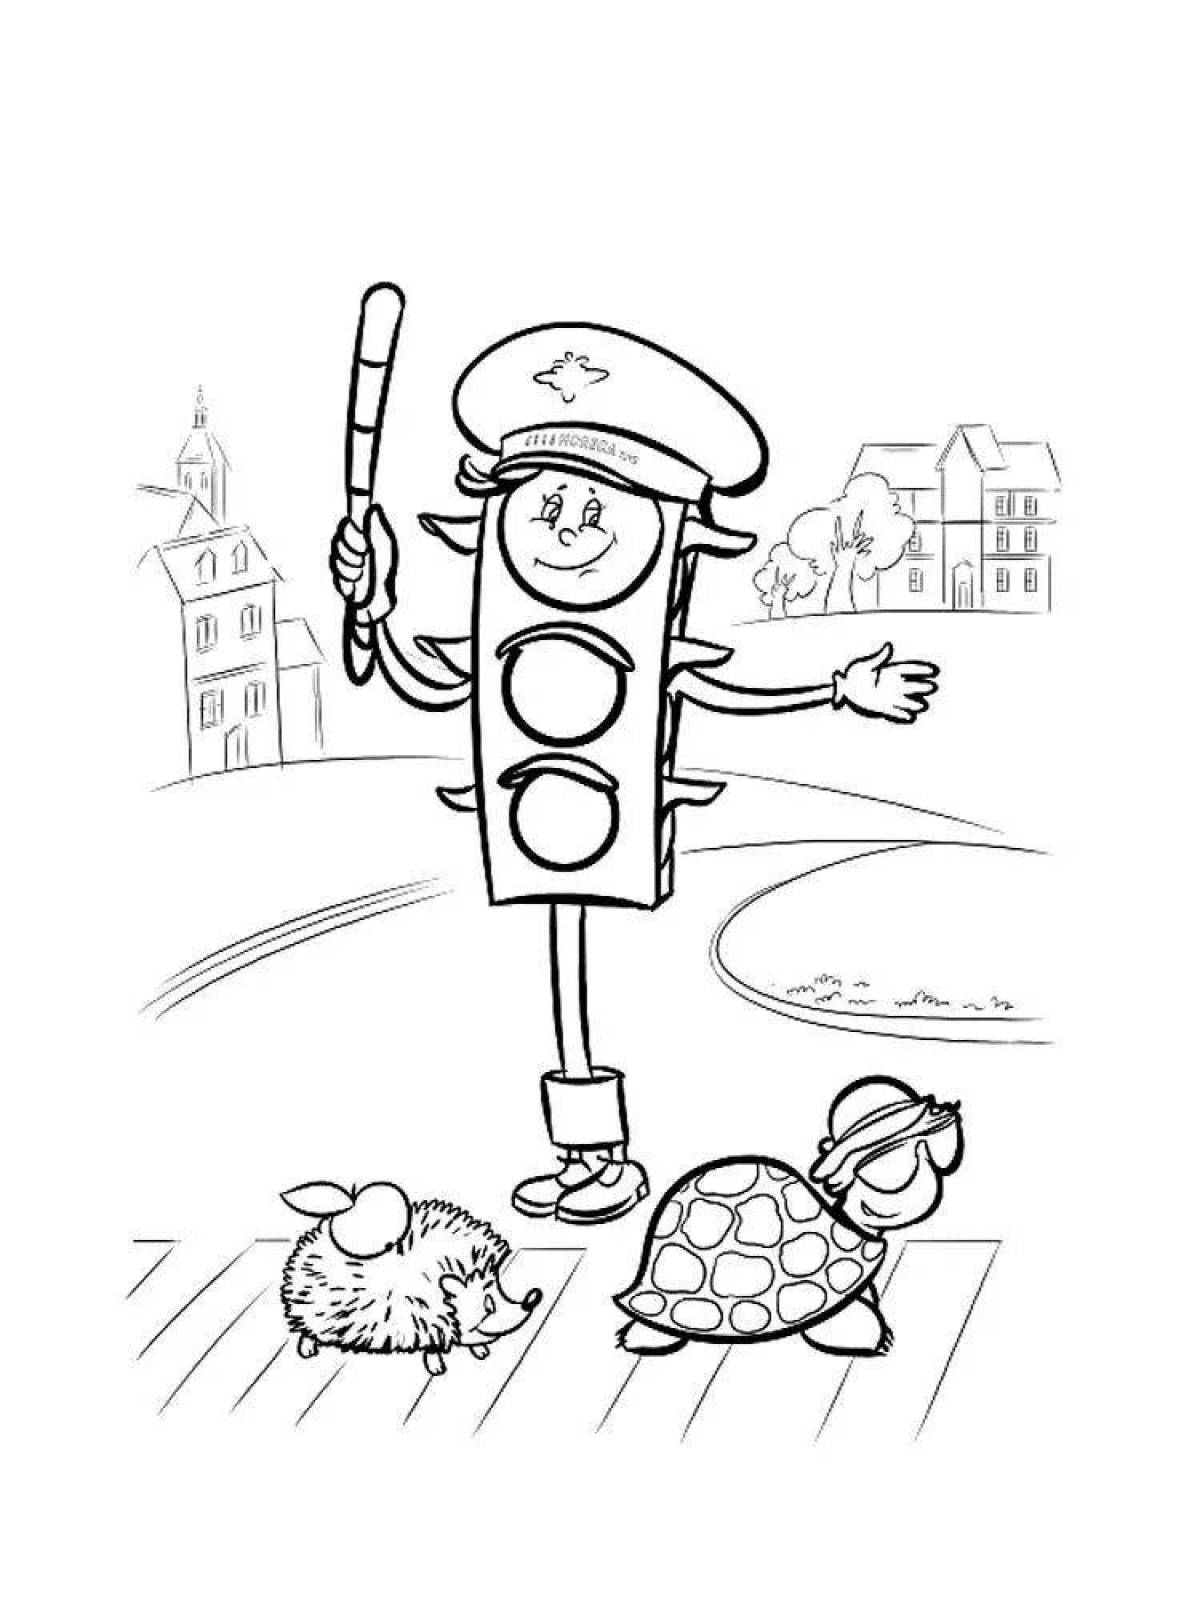 Fun rules of the road coloring book for preschoolers